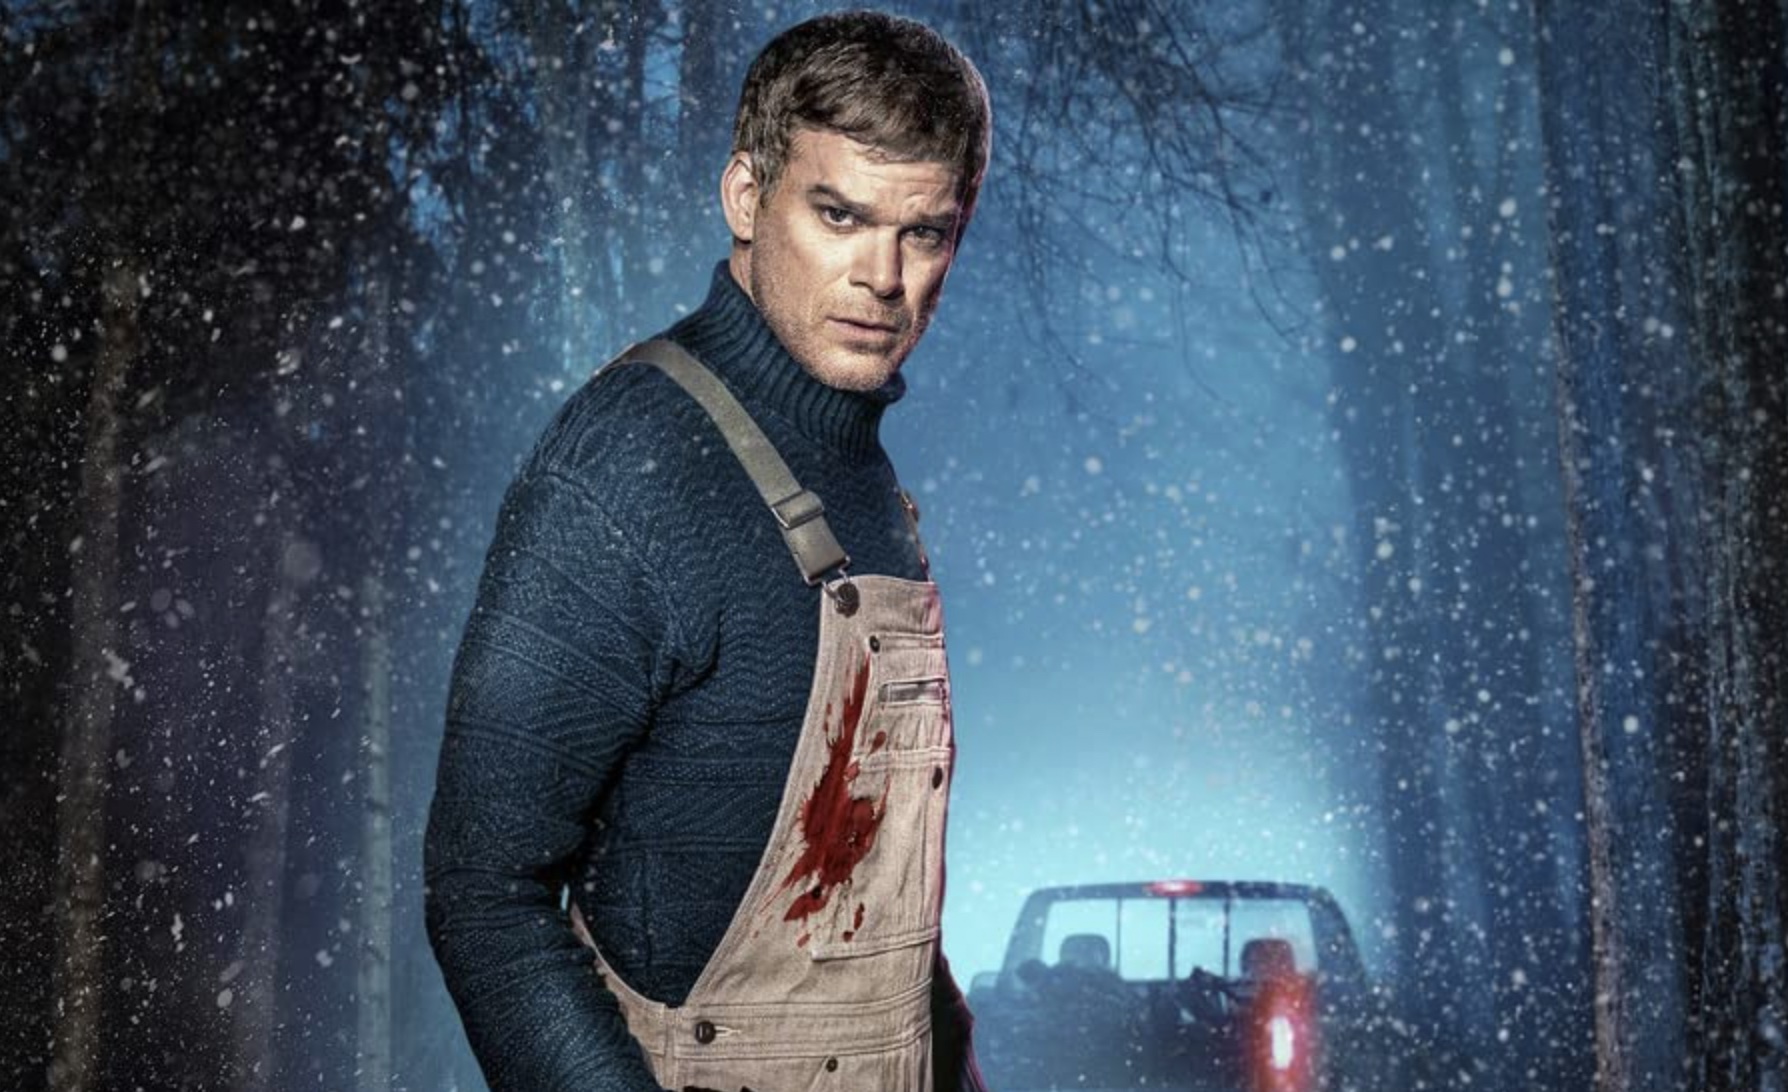 Dexter: New Blood Episode 1 Review - Cold Snap